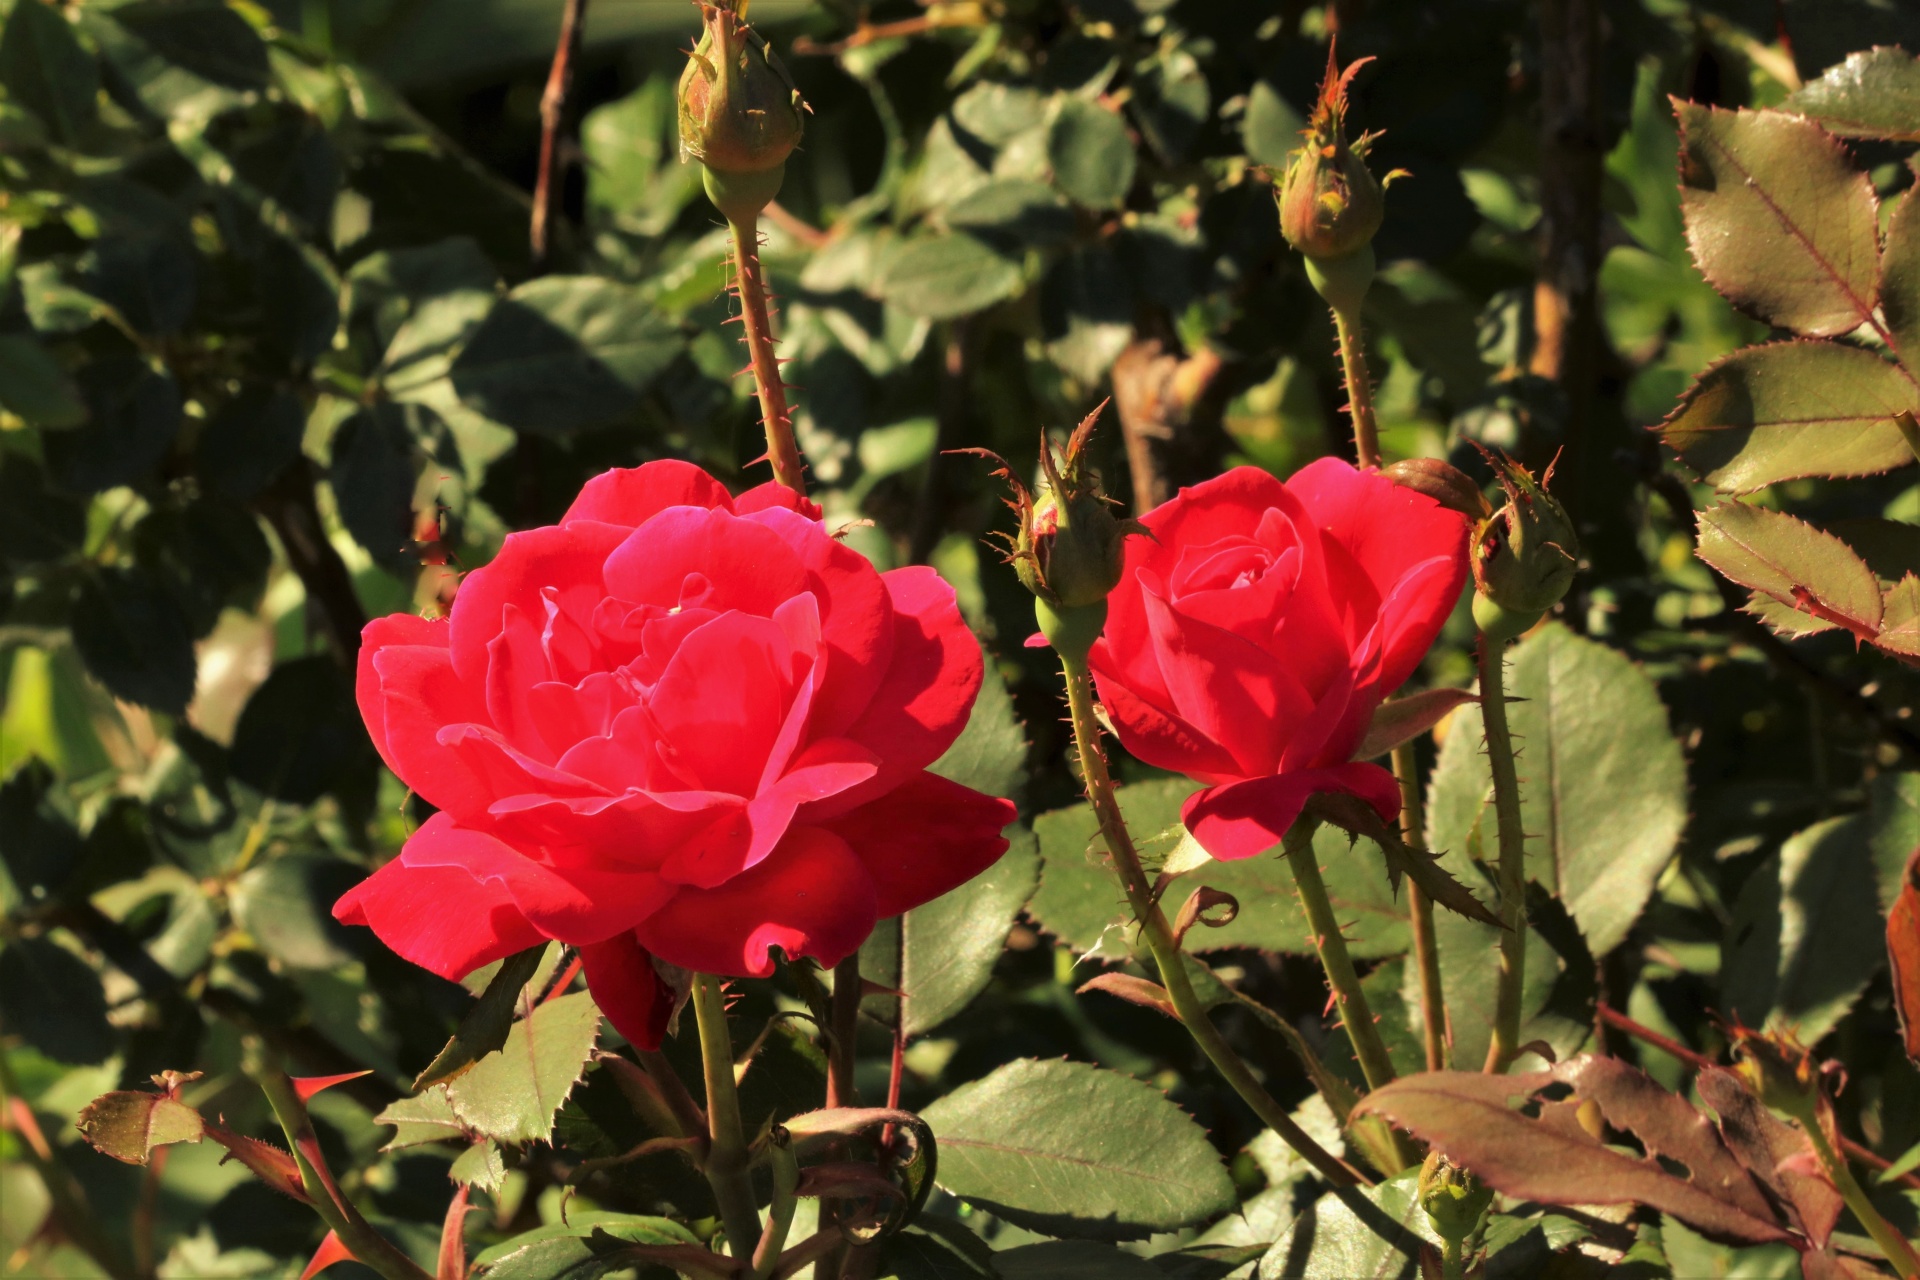 Close-up of two red roses and rose buds on a rose bush.